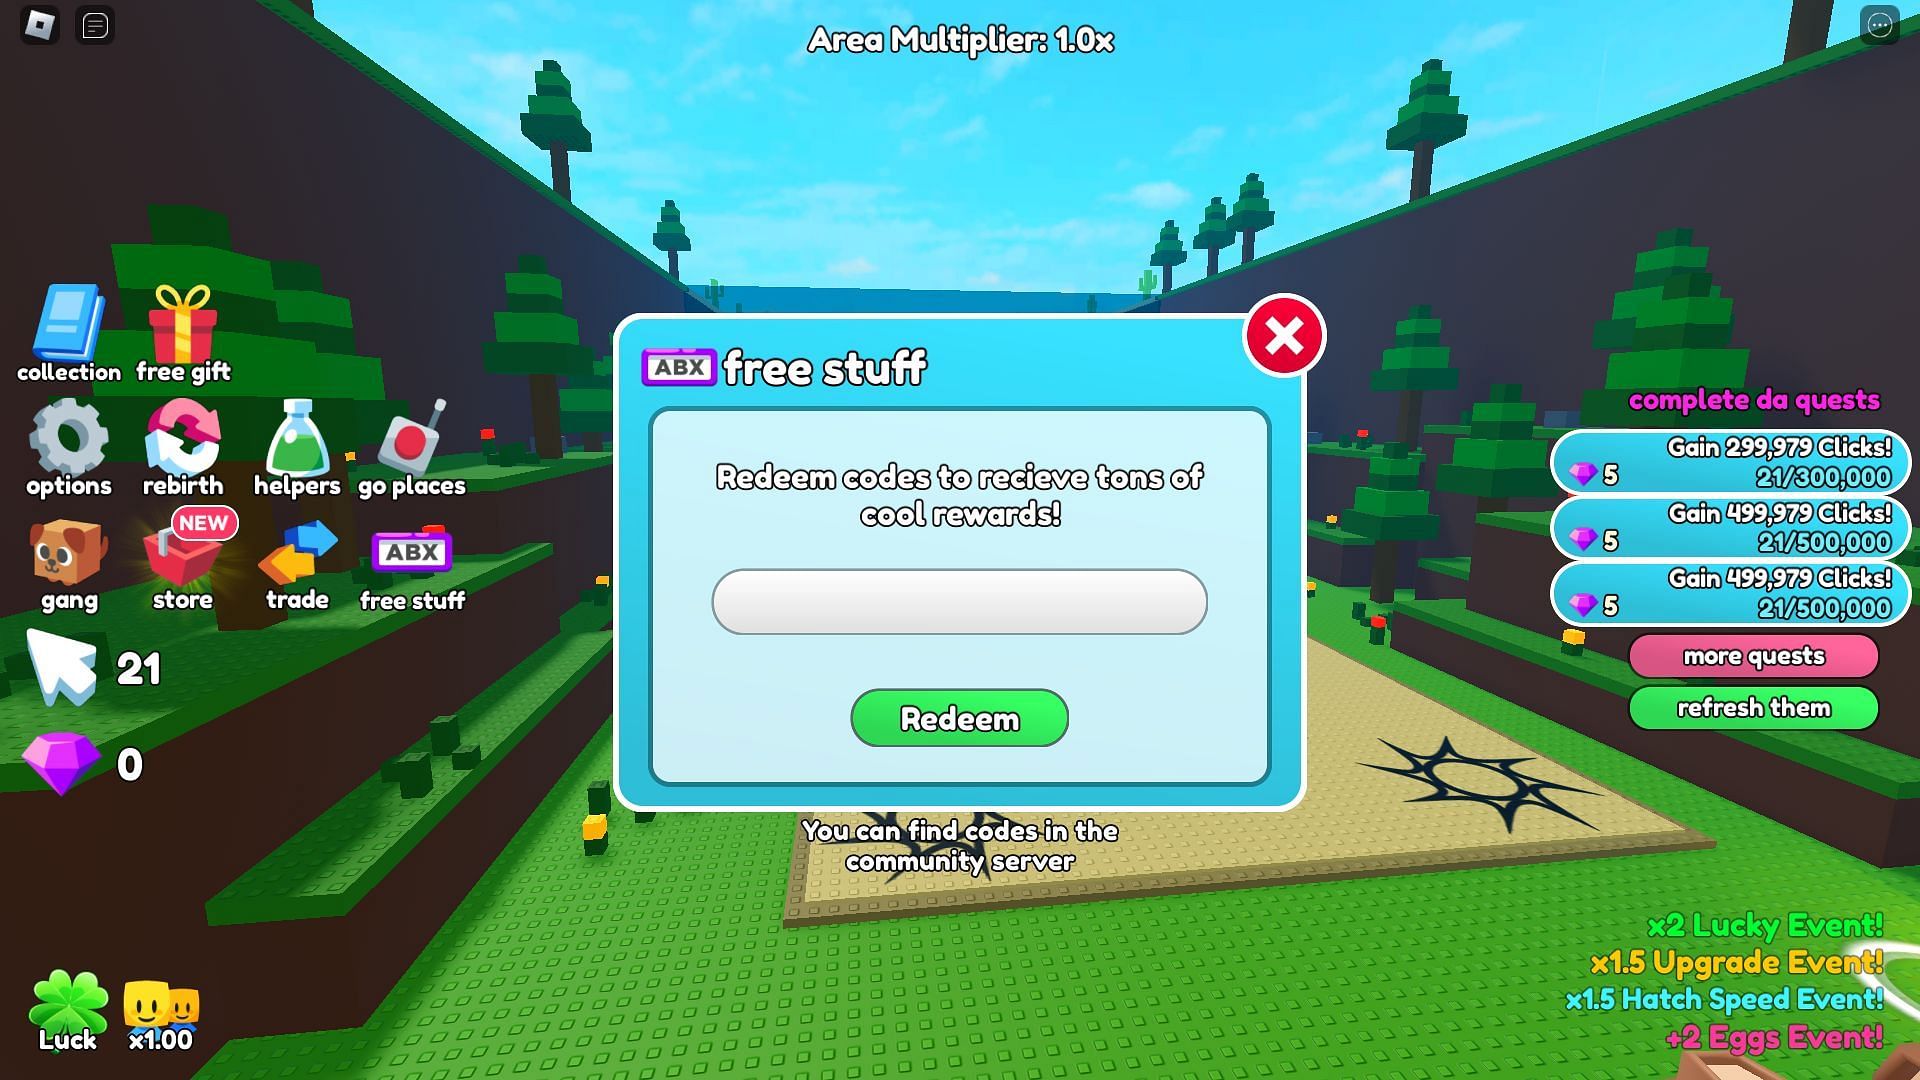 Active codes for Evry Simulator Ever (Image via Roblox)